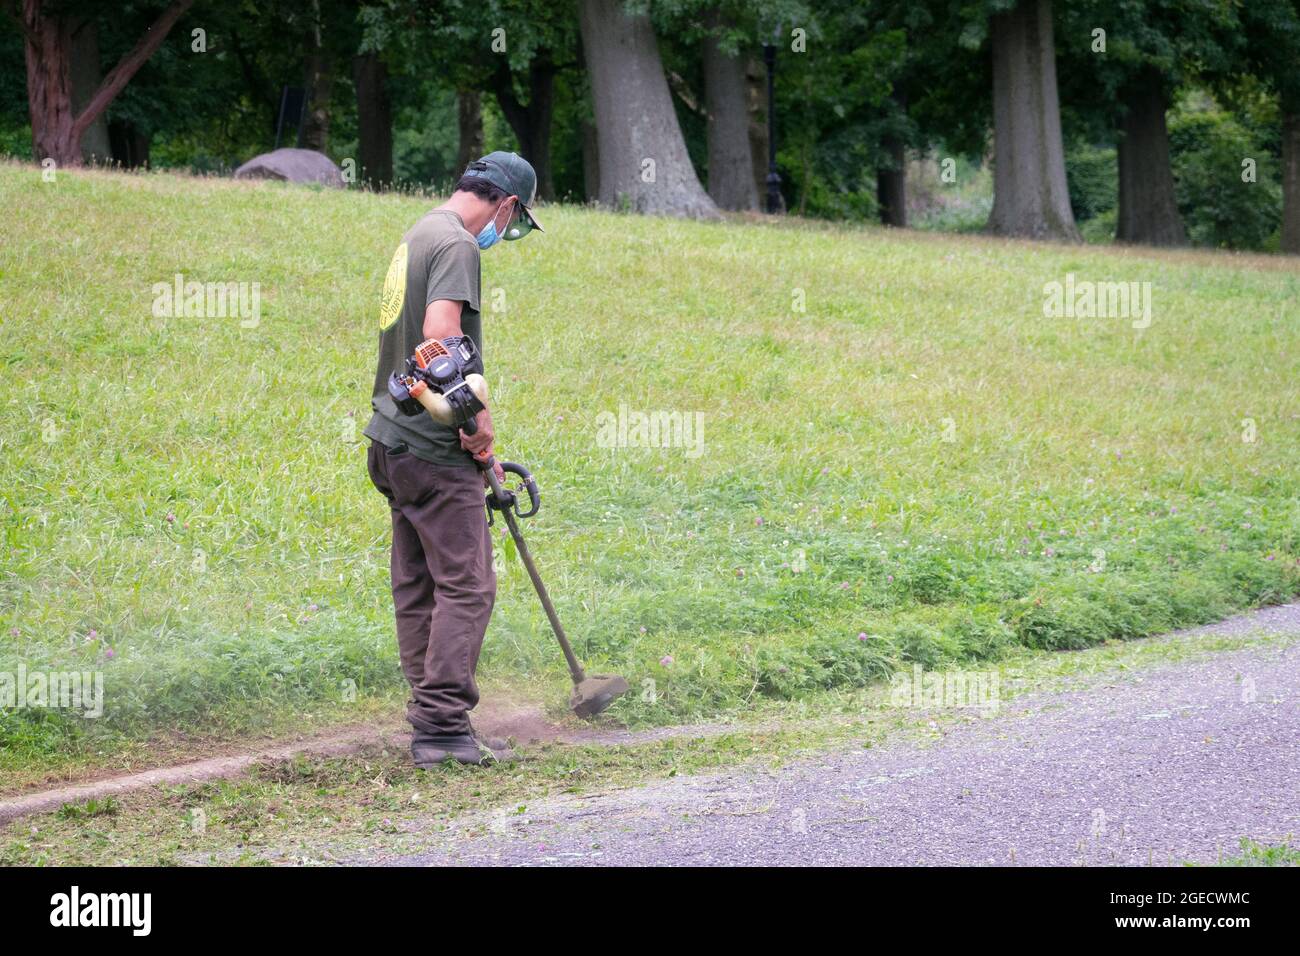 A New York City Parks Department worker uses a weed whacker to trim growth near a curb in a park in Queens, New York City. Stock Photo